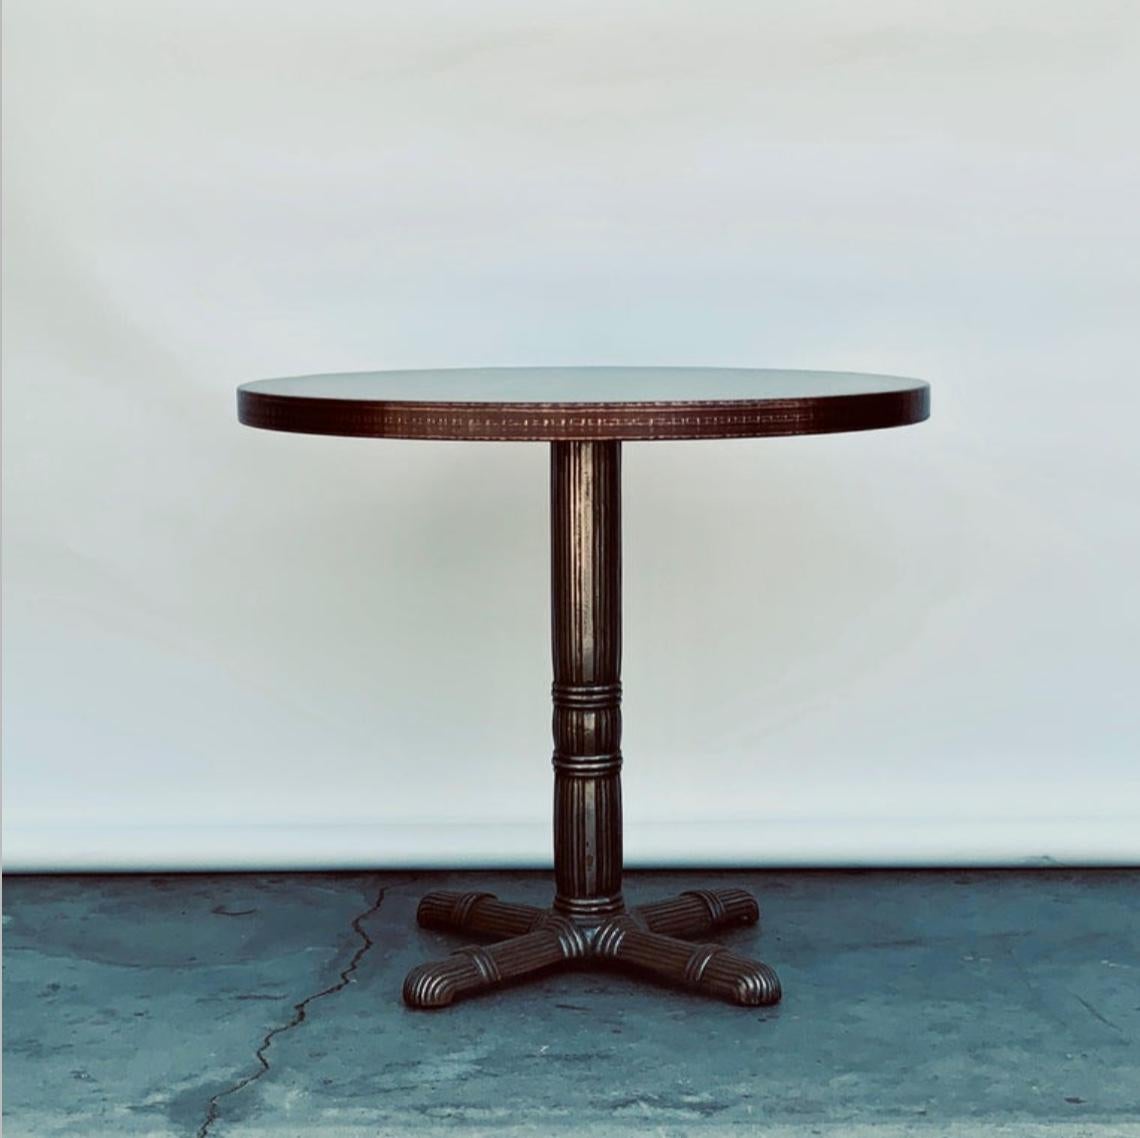 Polished steel and raw copper top gueridon / side table.

Polished steel French Art Deco base with an antiviral raw copper top (researchers reported last month that the novel coronavirus causing the COVID-19 pandemic survives for days on glass and